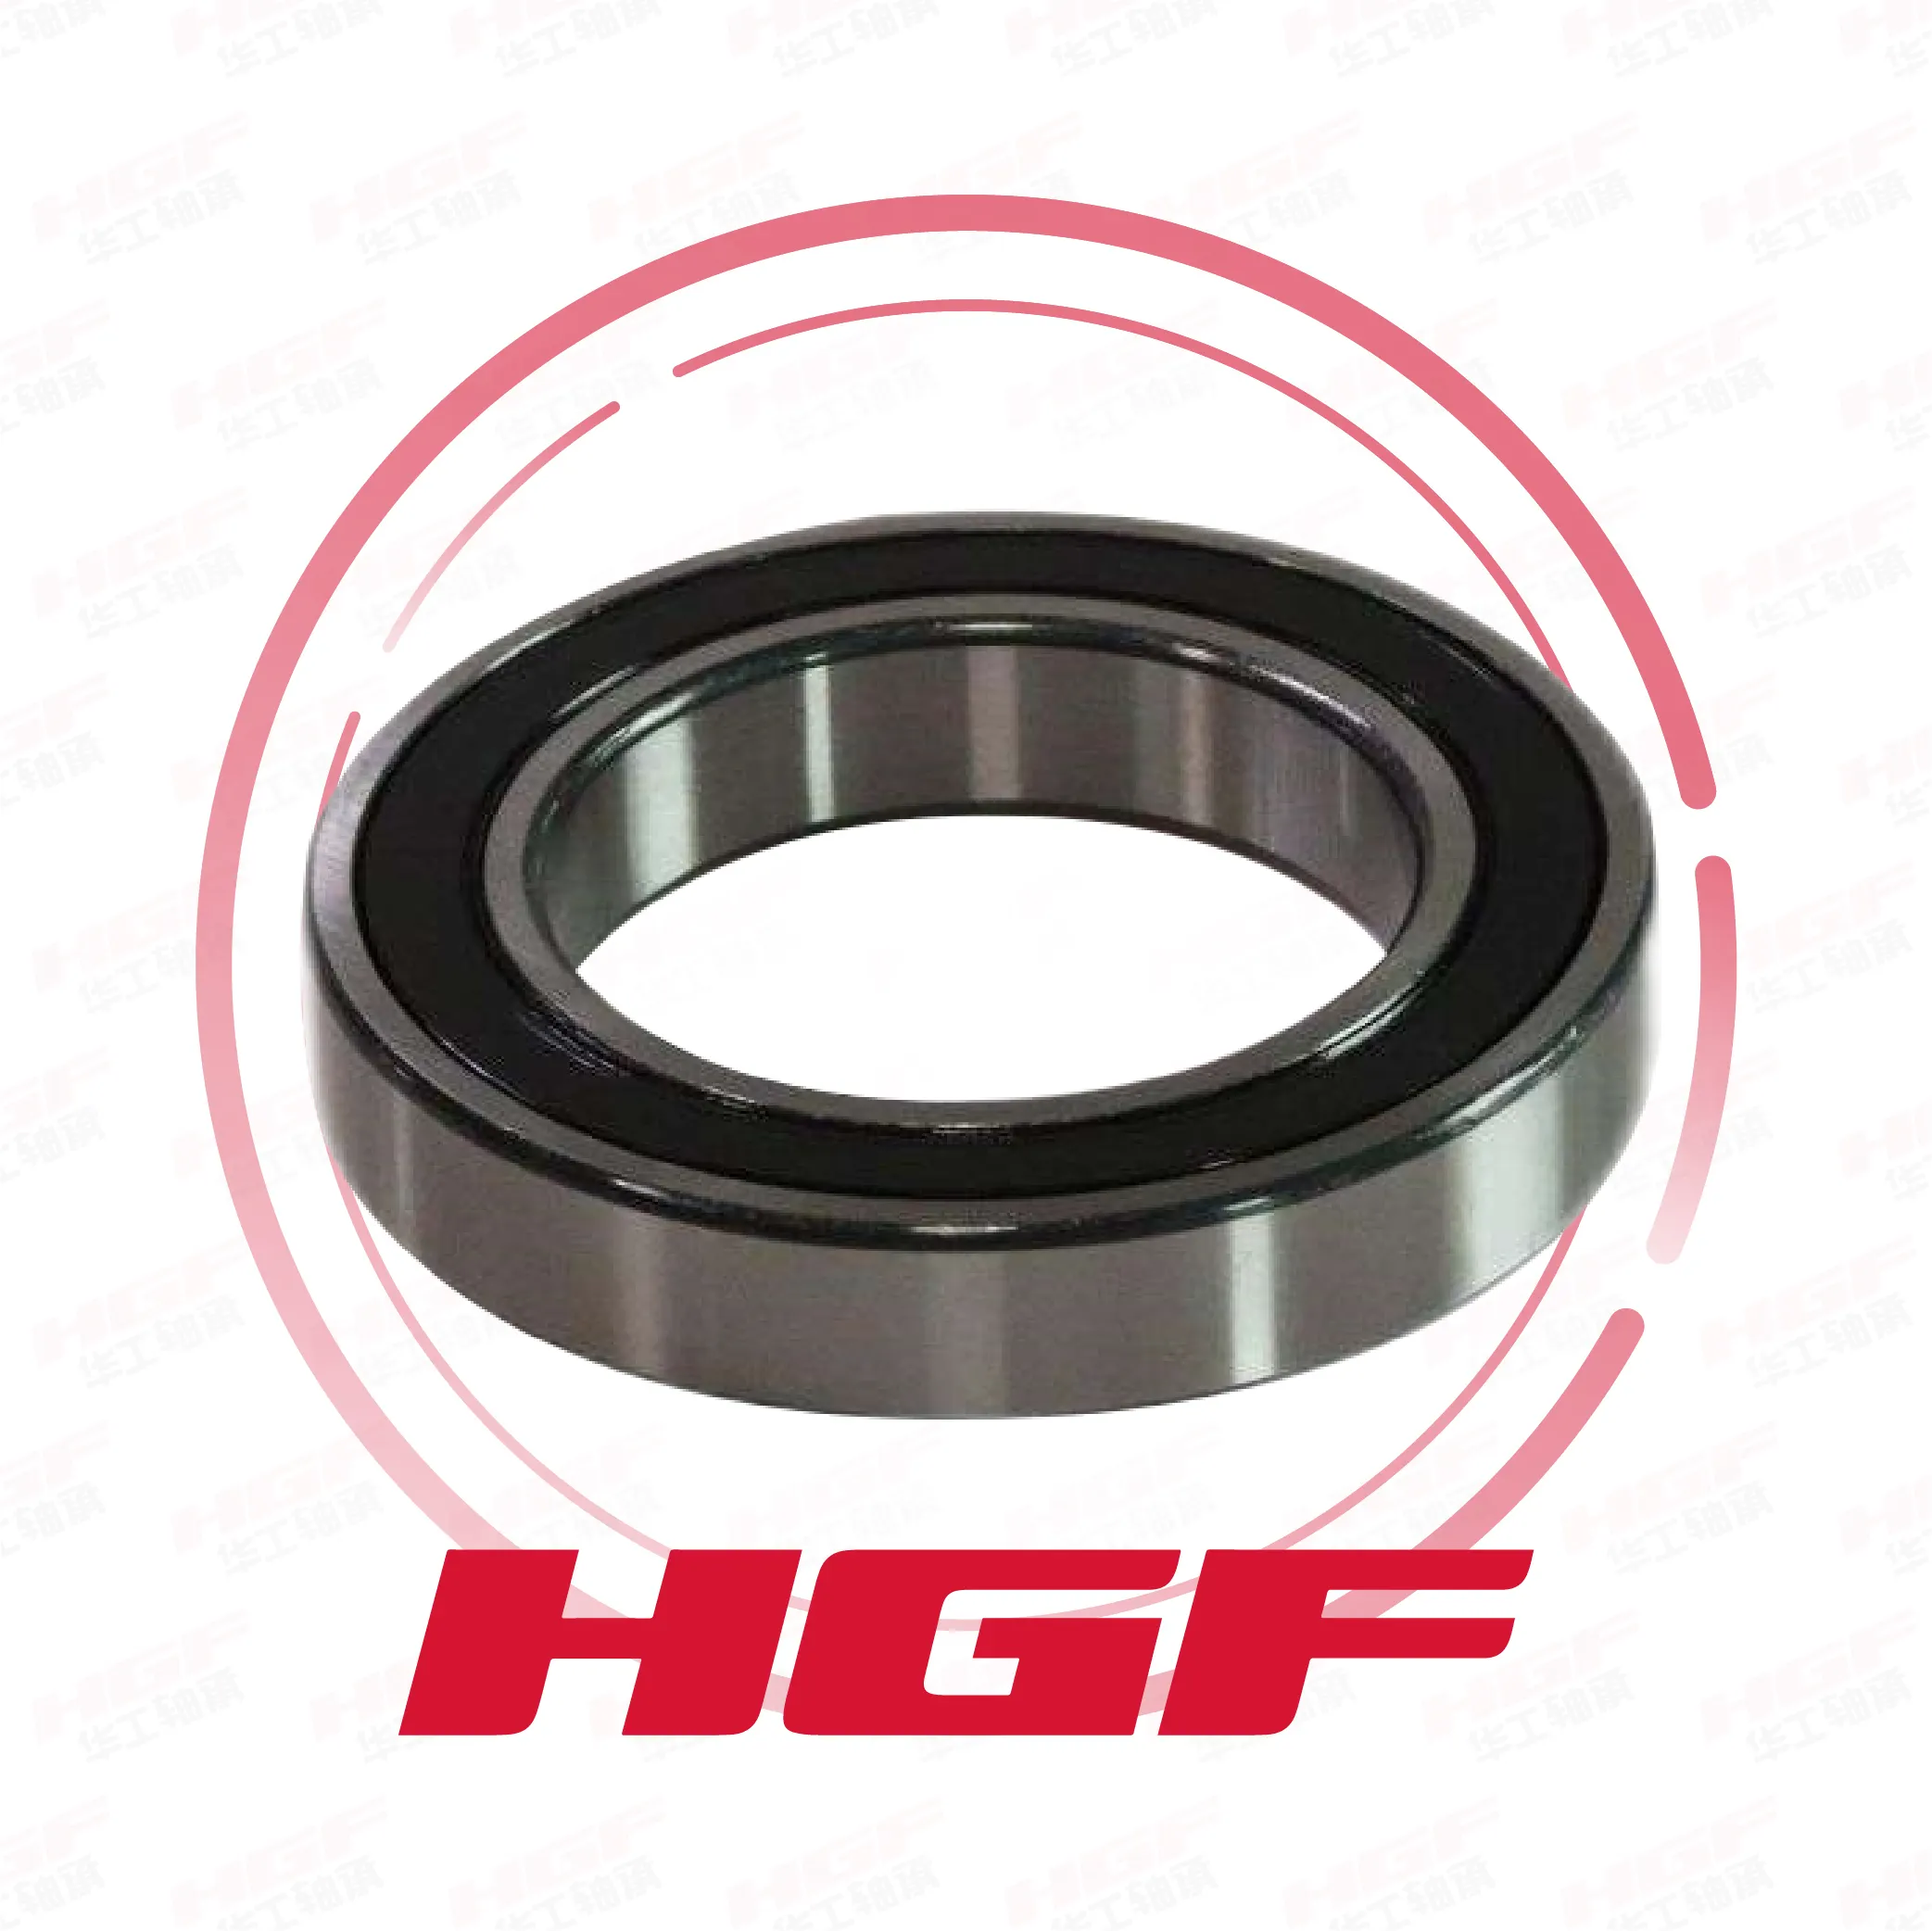 HGF High Temperature 6200 6301 6302 6303 6304 6305 6306 6307 6309 2rs zz c3 Deep Groove Ball Bearing For Motor Ceiling Fan